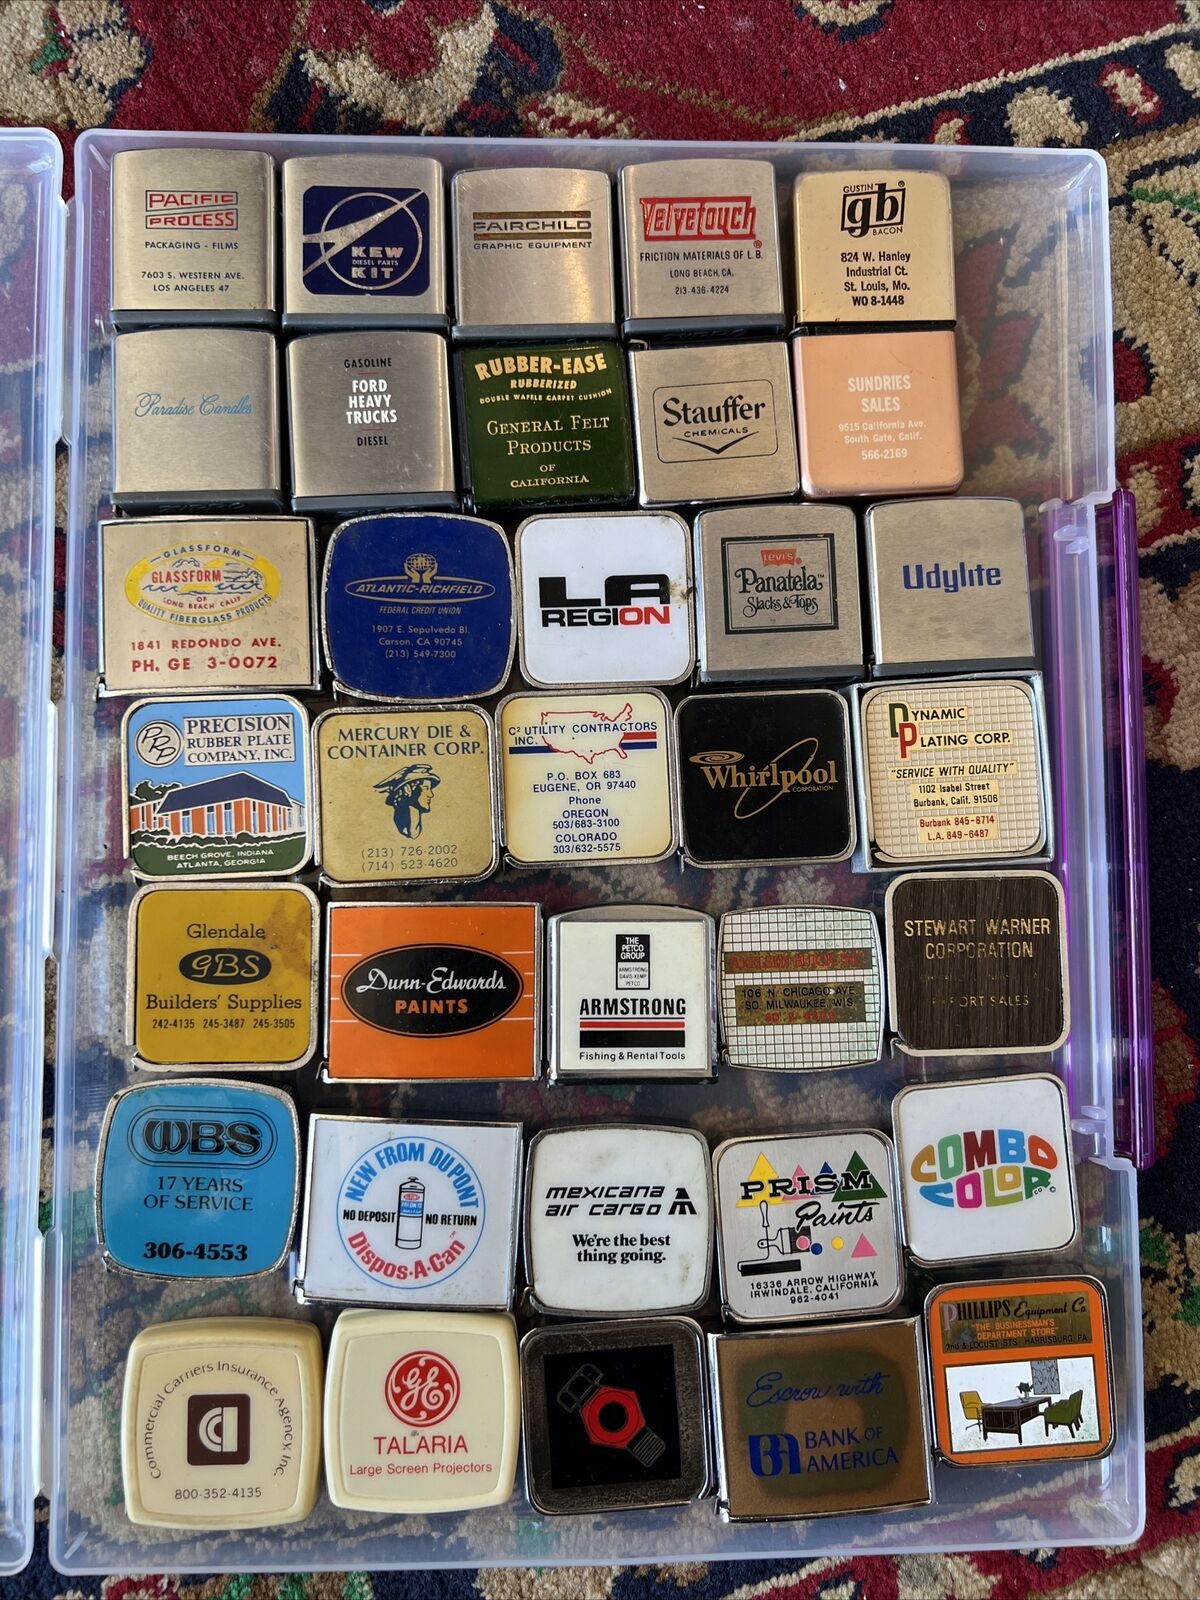 Lot 35 Different Vintage Advertising Tape Measures - Barlow - Zippo